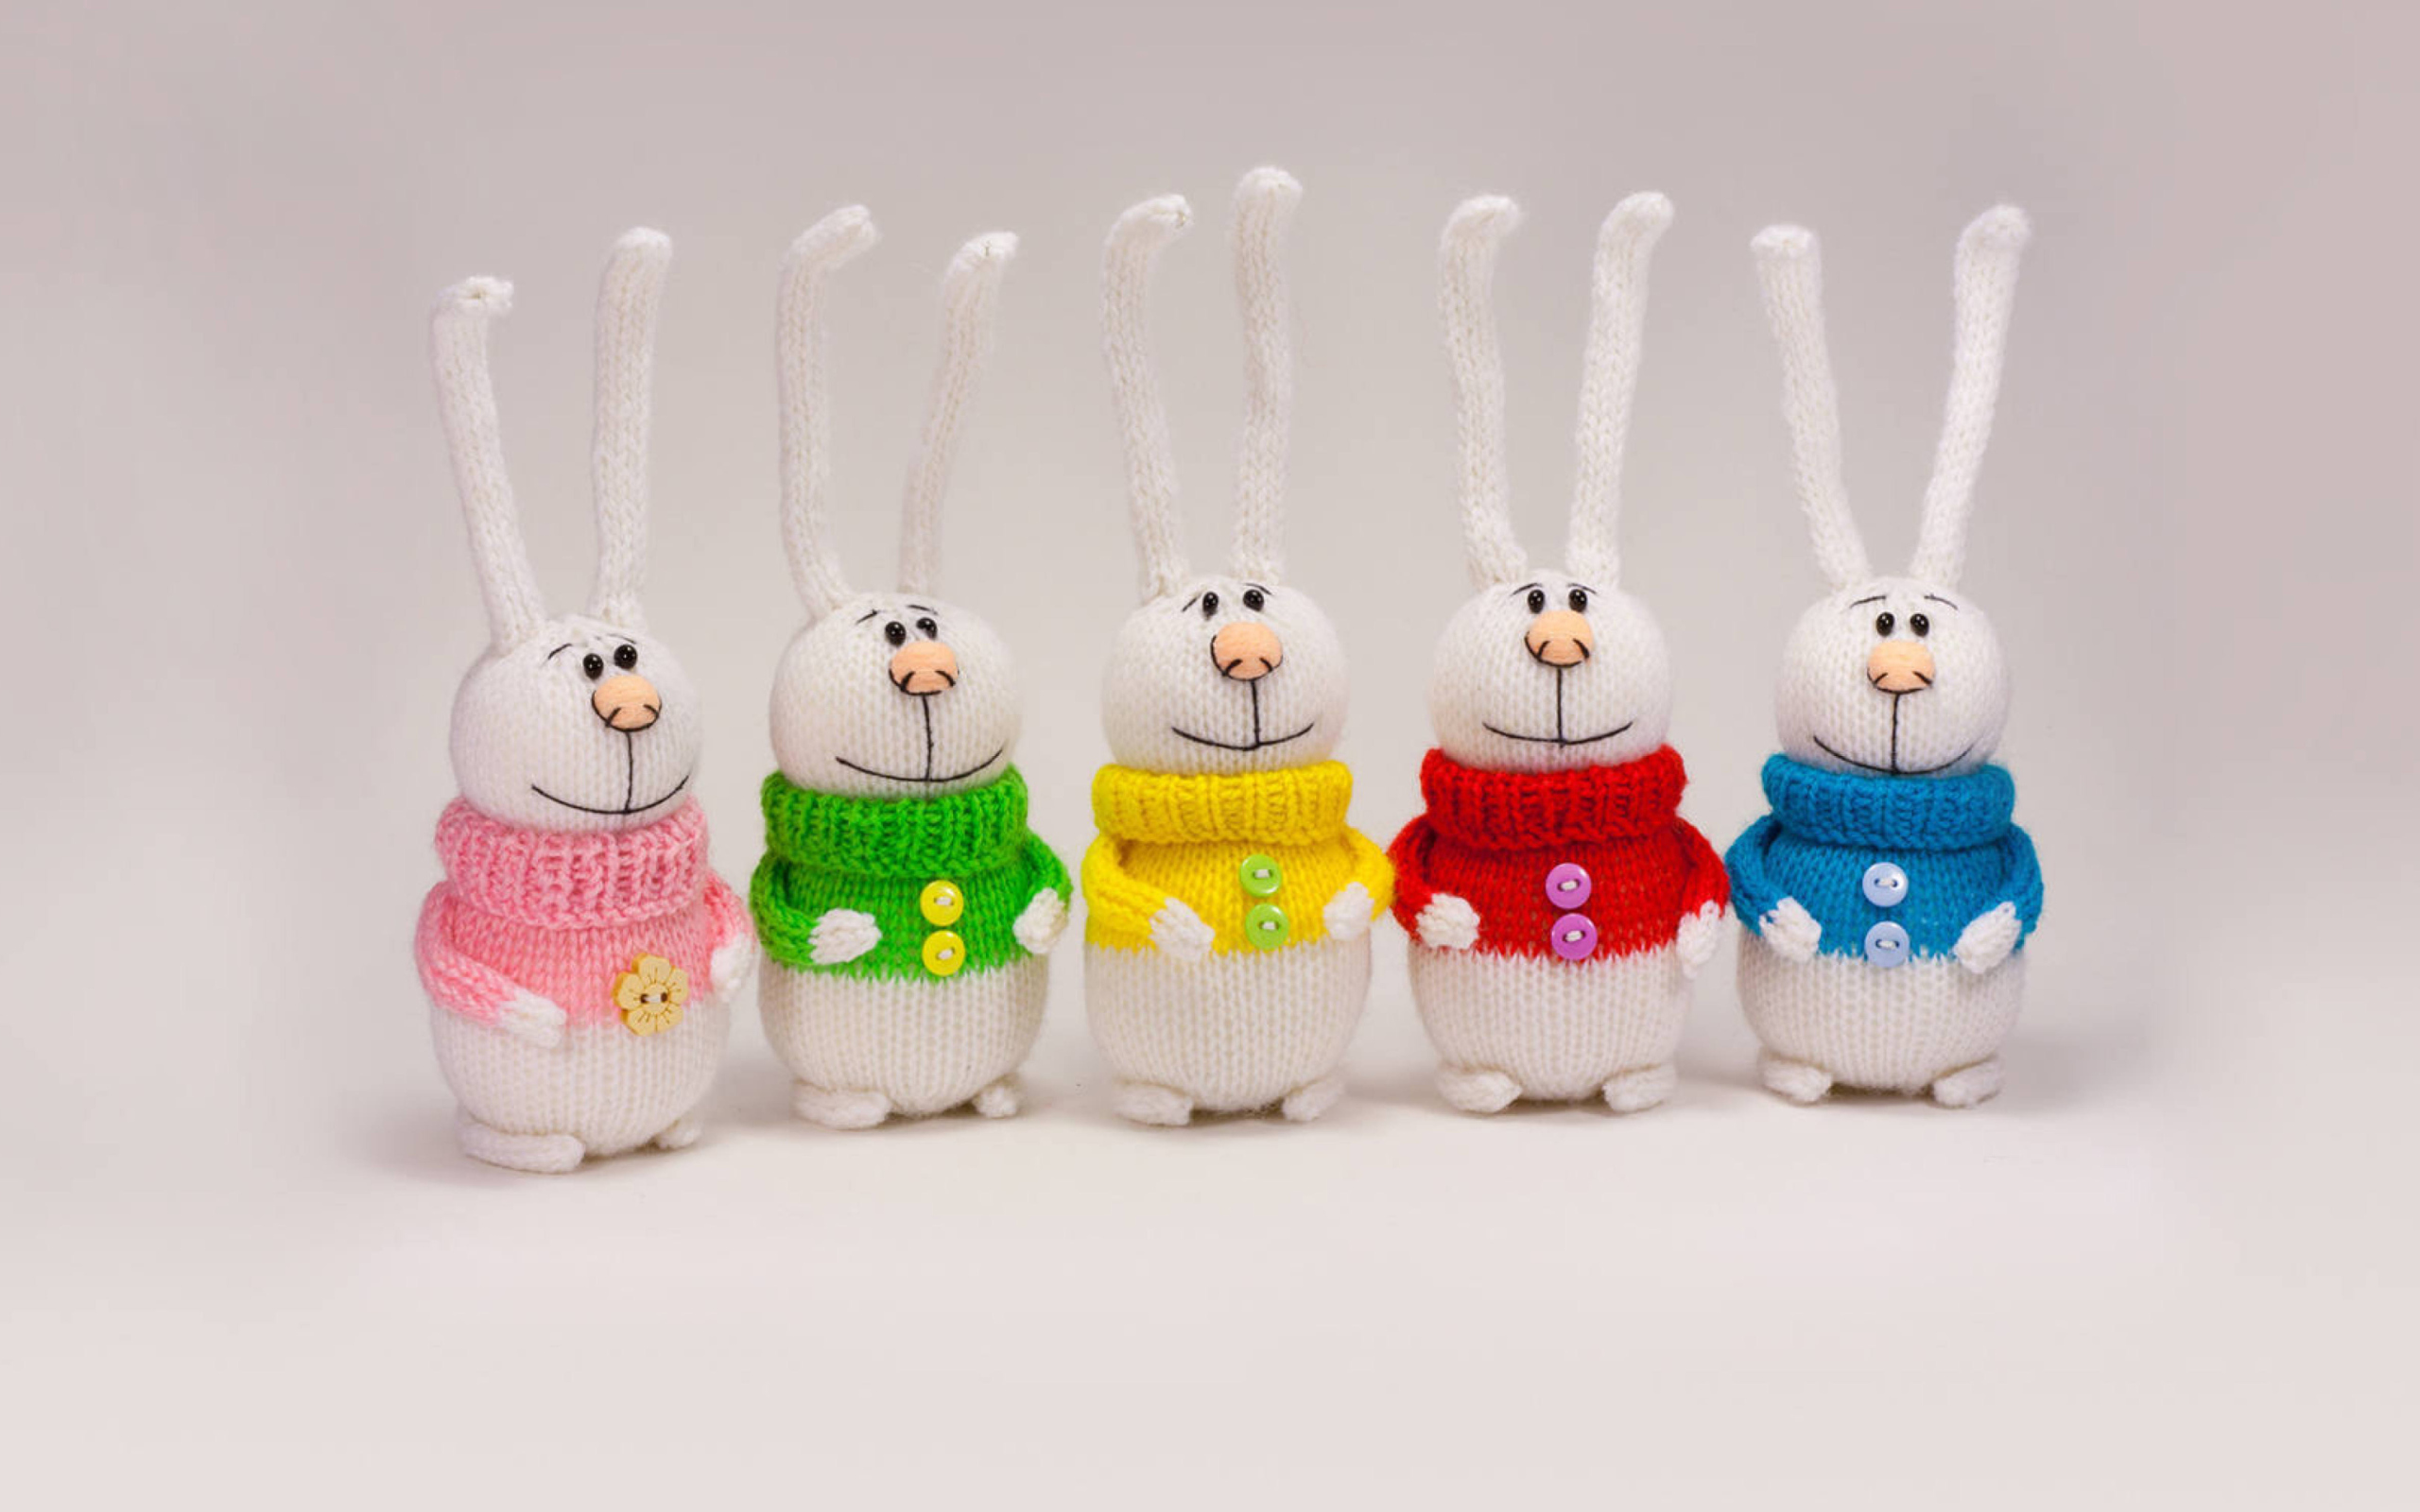 Funny Knitted Bunnies wallpaper 2560x1600